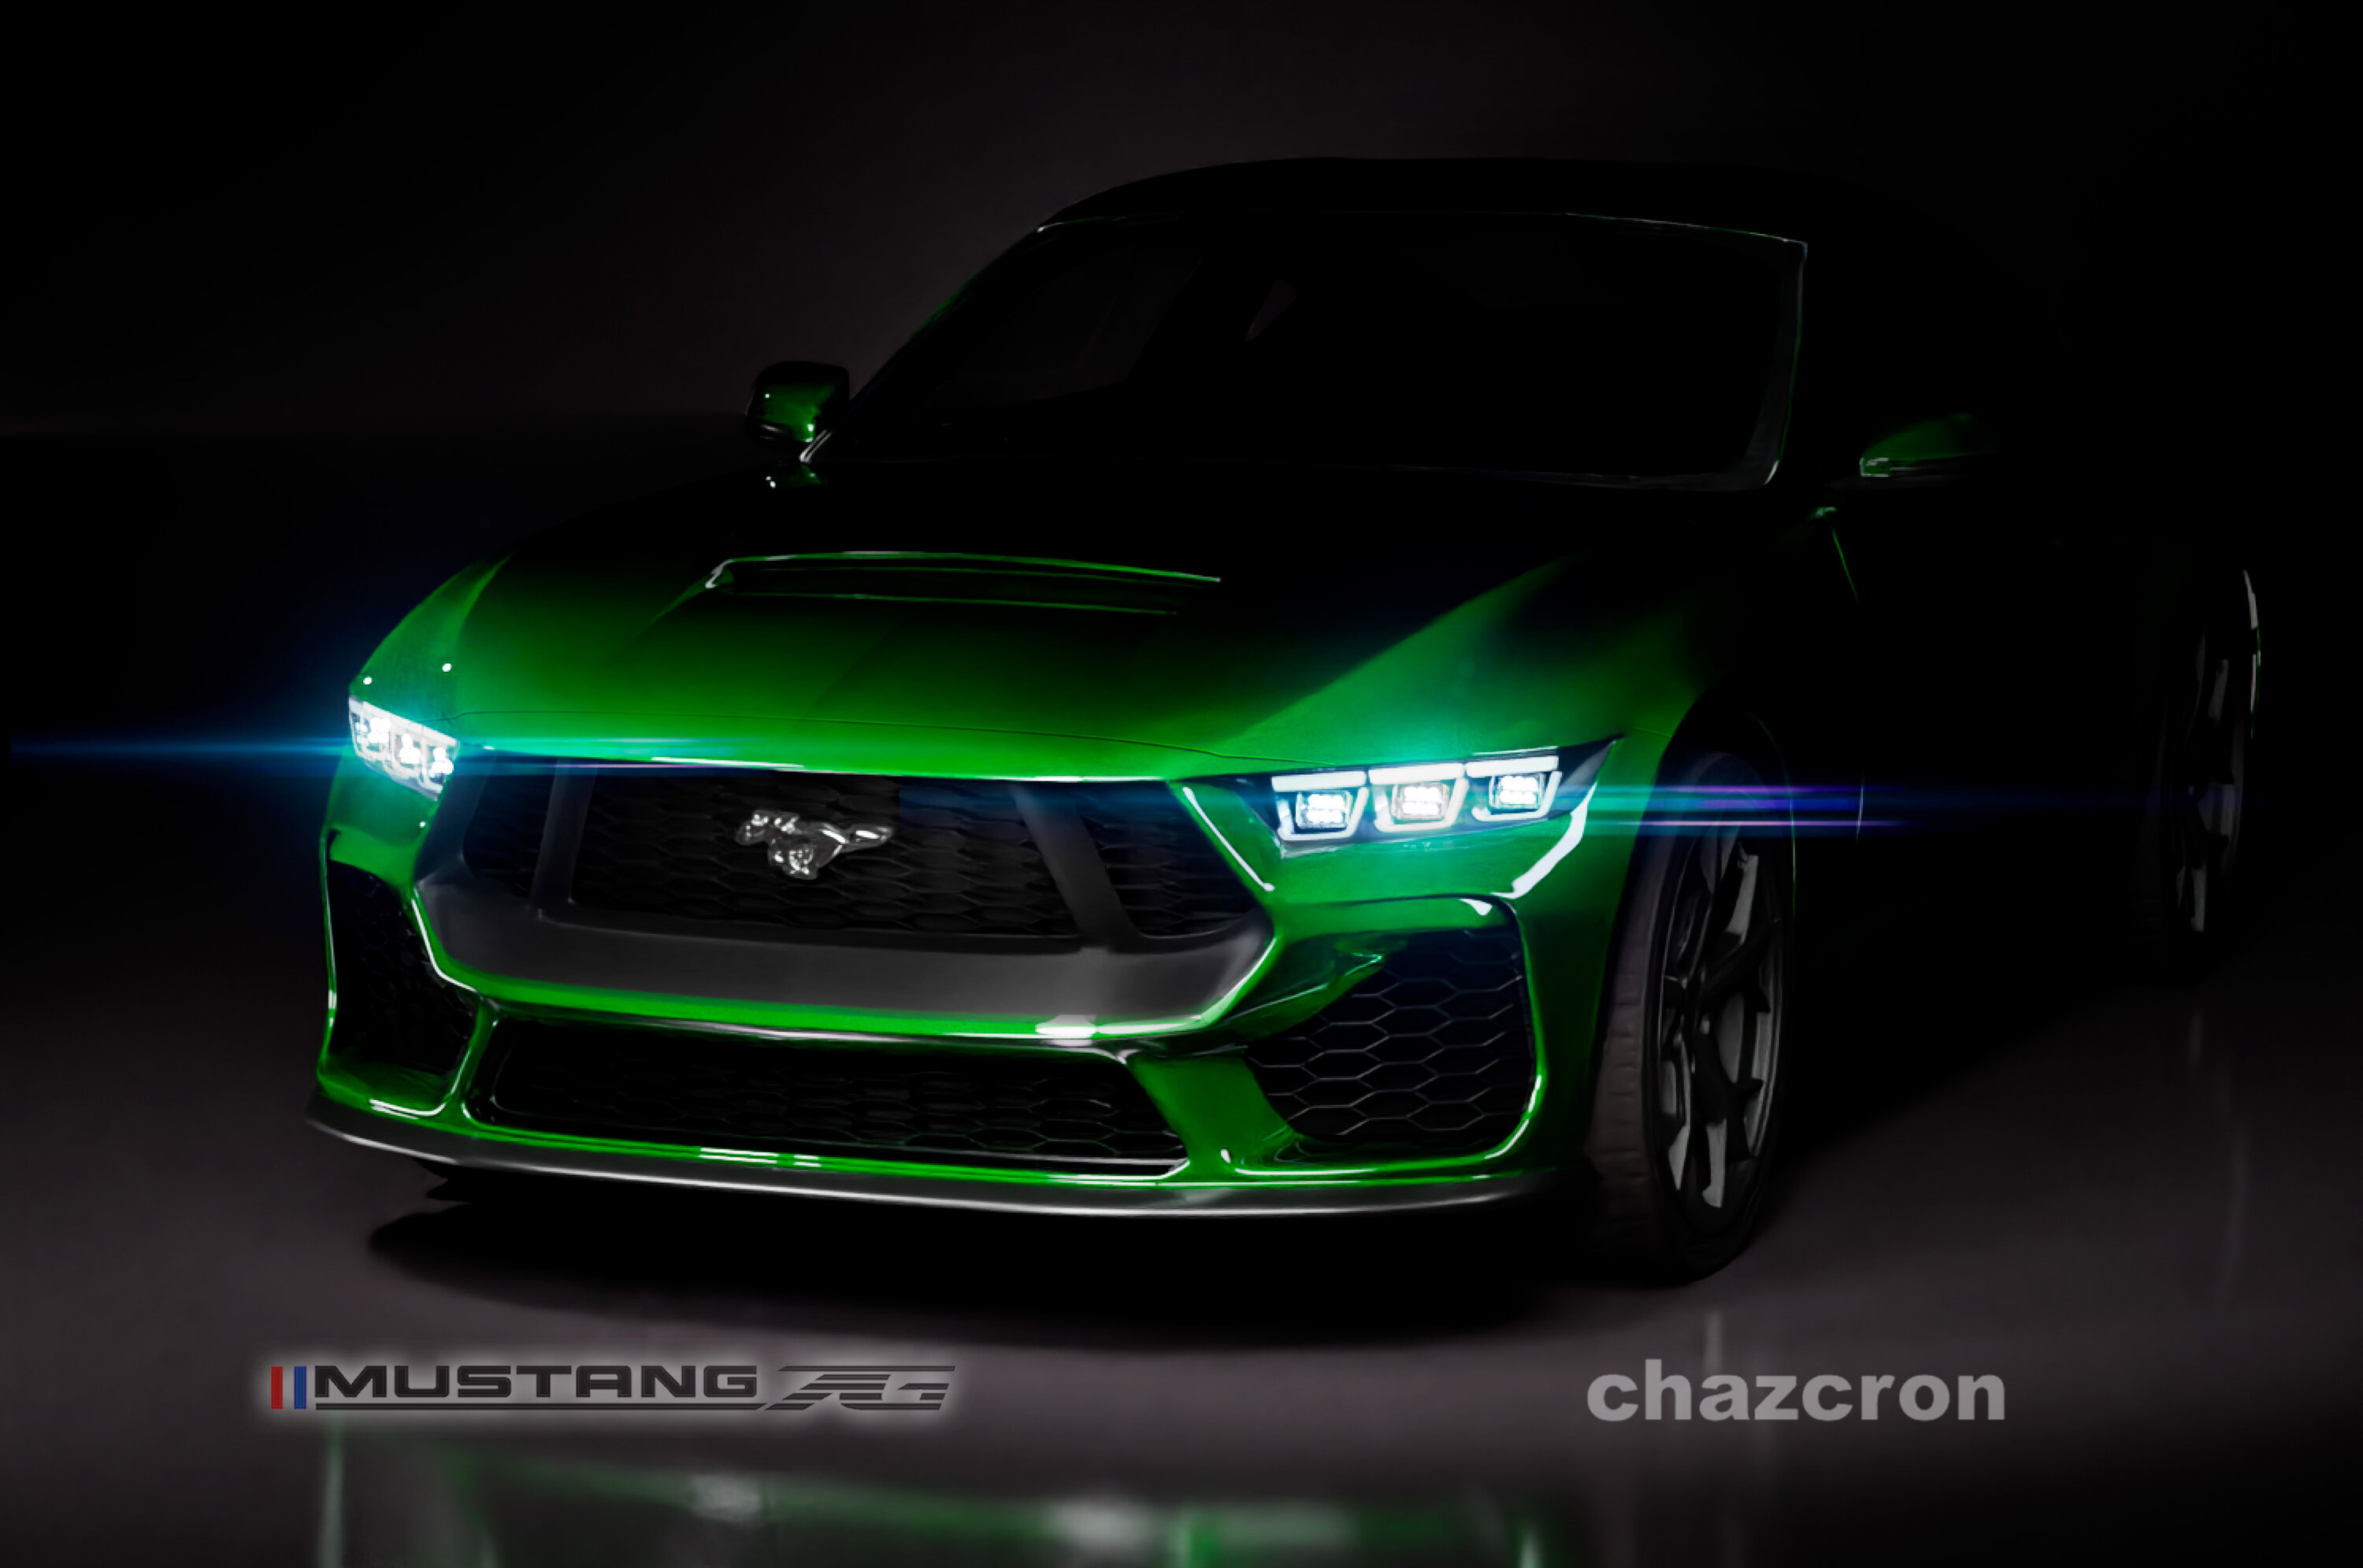 S650 Mustang chazcron weighs in... 7th gen 2023 Mustang S650 3D model & renderings in several colors! GreenRefined